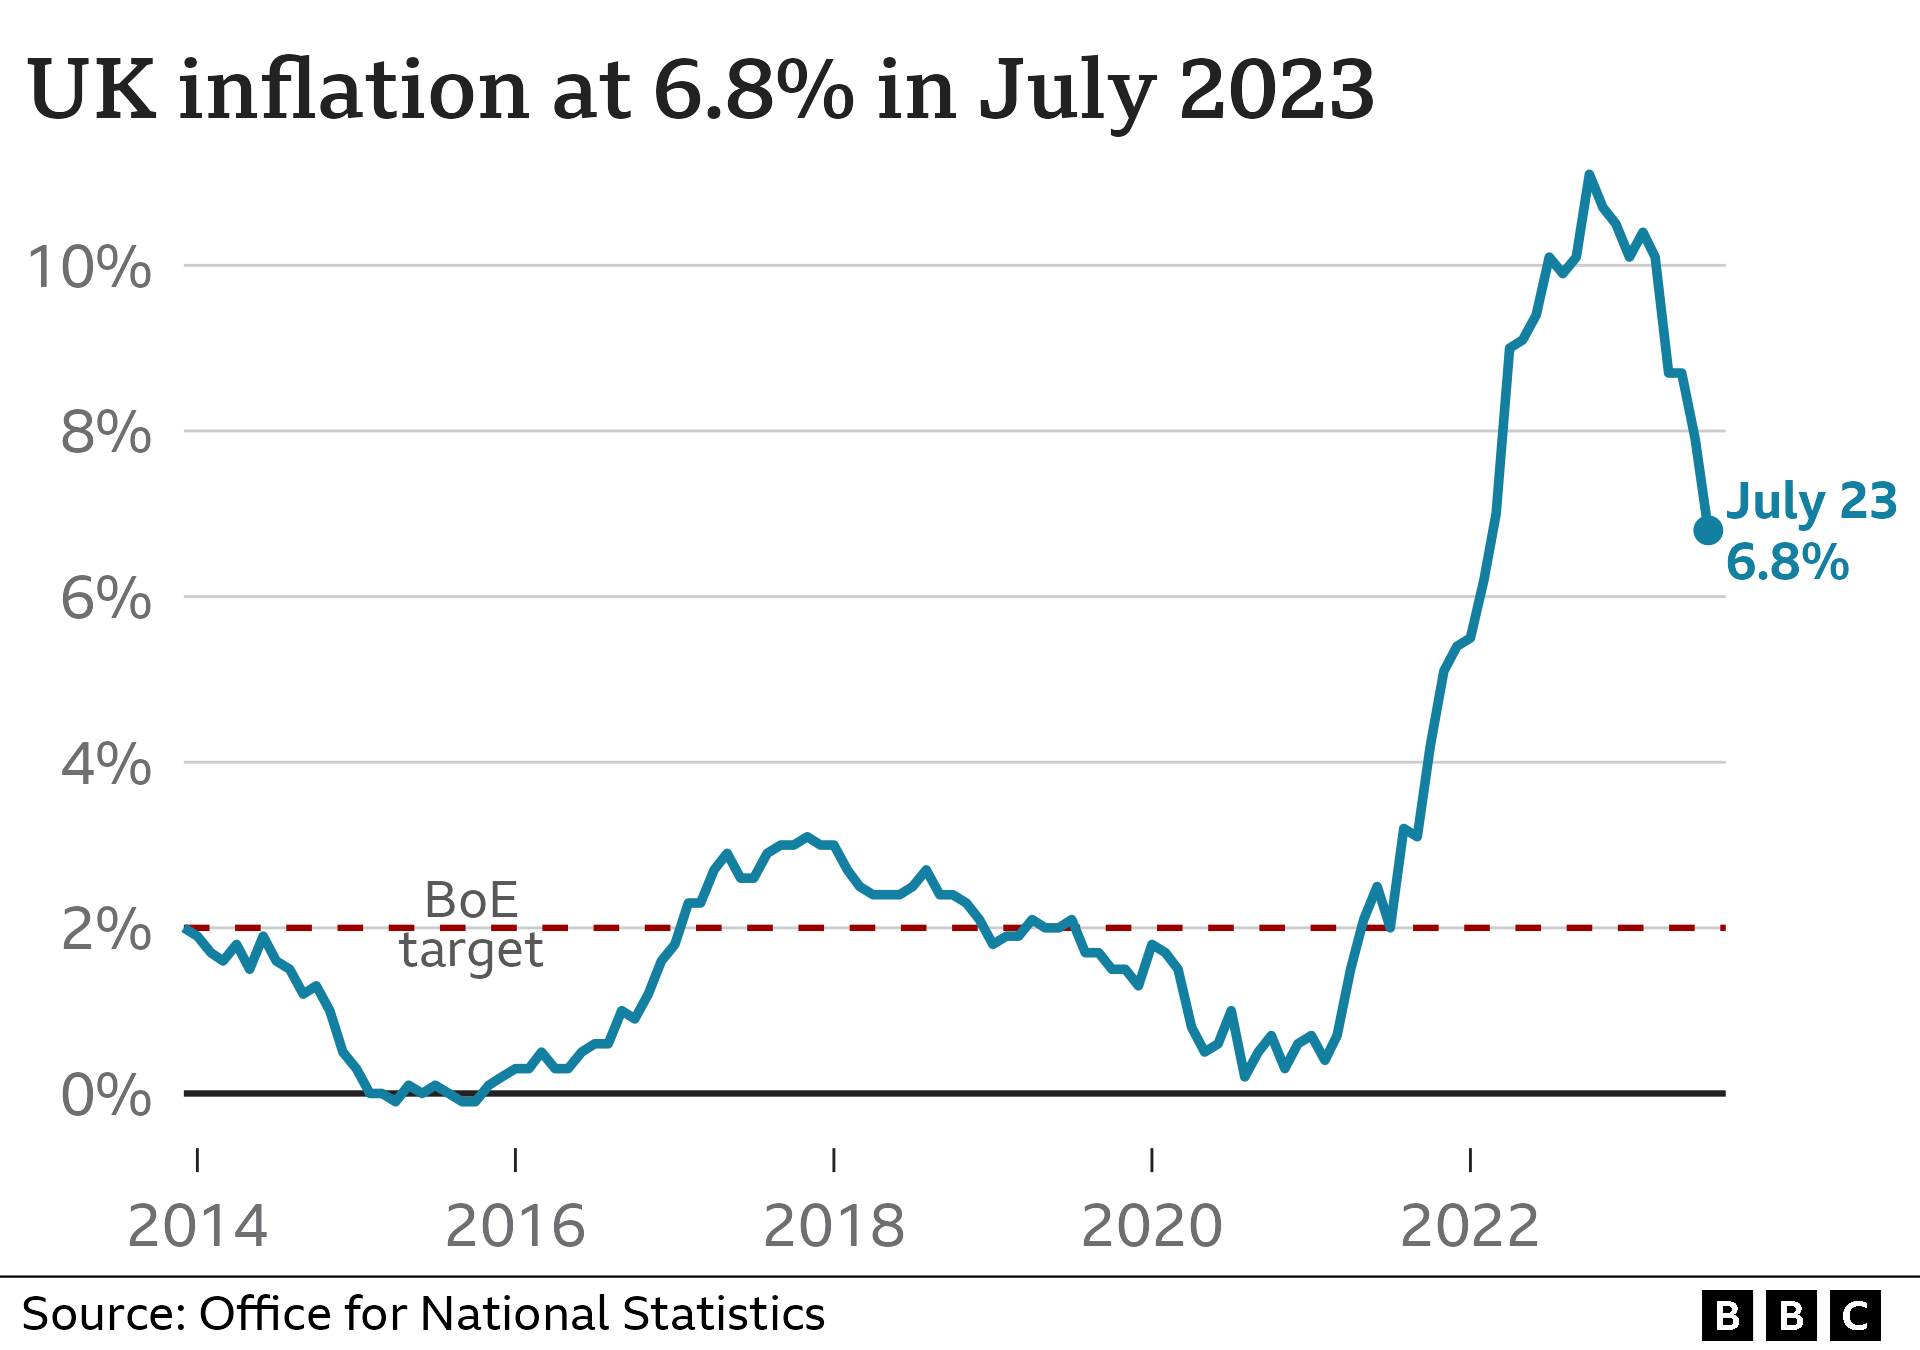 Line chart showing inflation rates since 2014 with a peak in 2023 falling to 6.8% in July